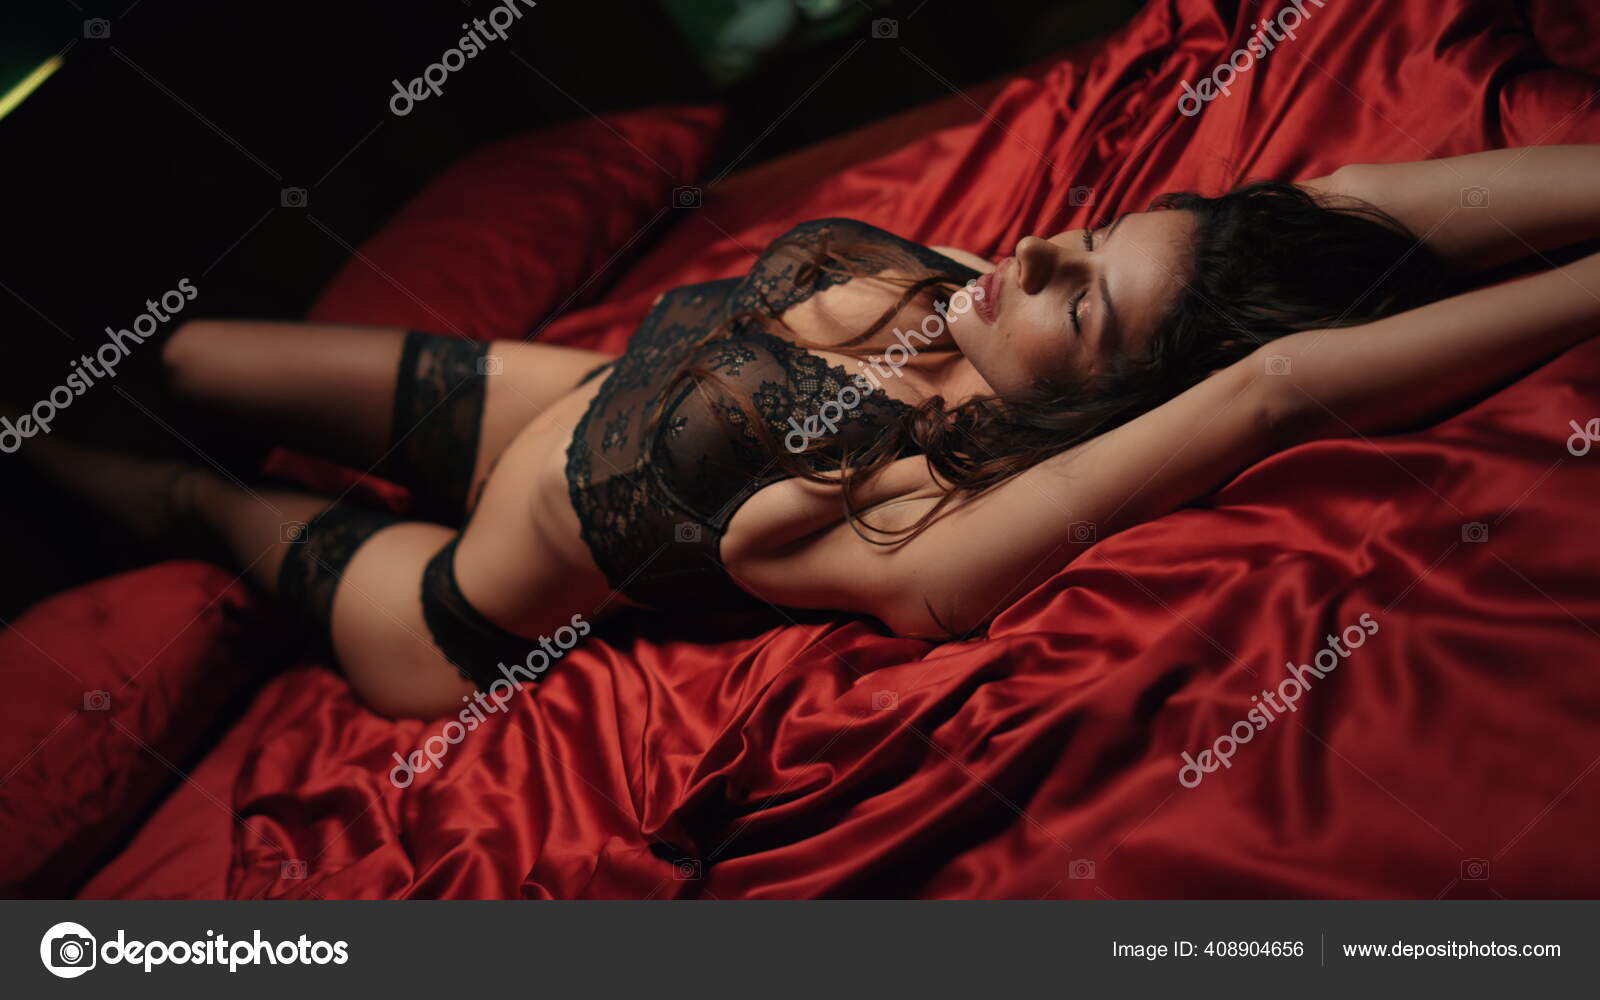 Hot woman arching back on silk photo image picture